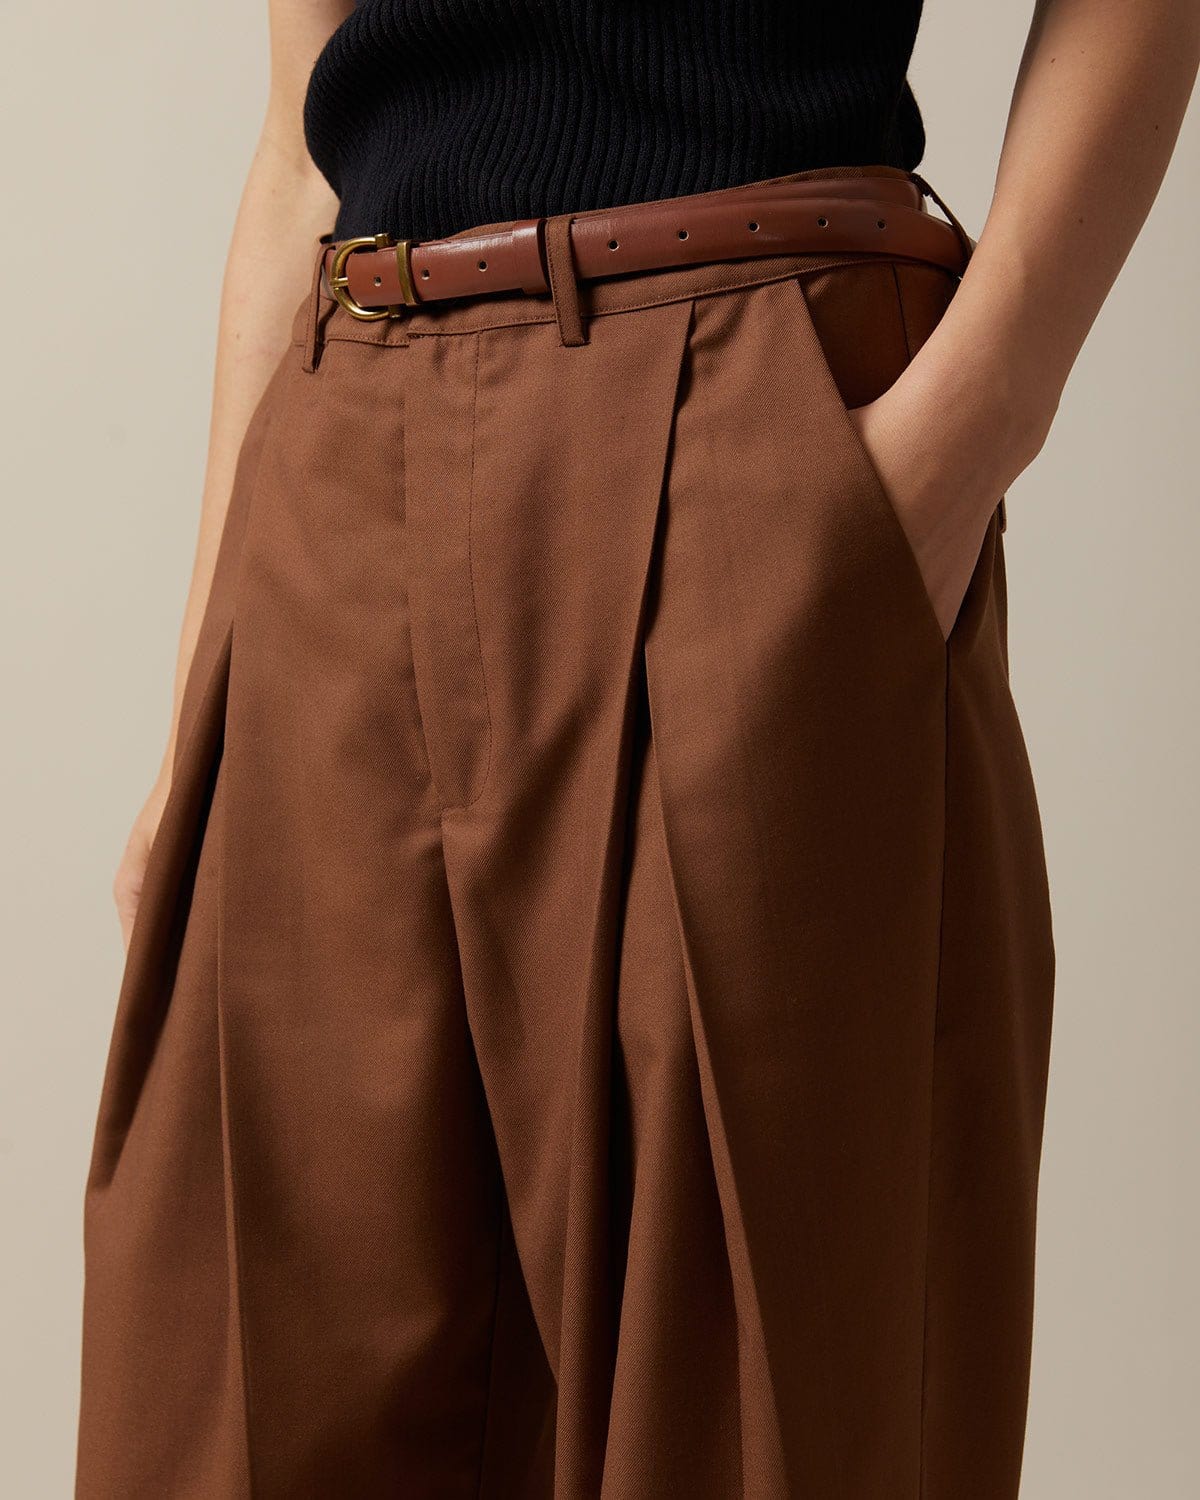 The Brown High Waisted Pleated Straight Pants - Women's High